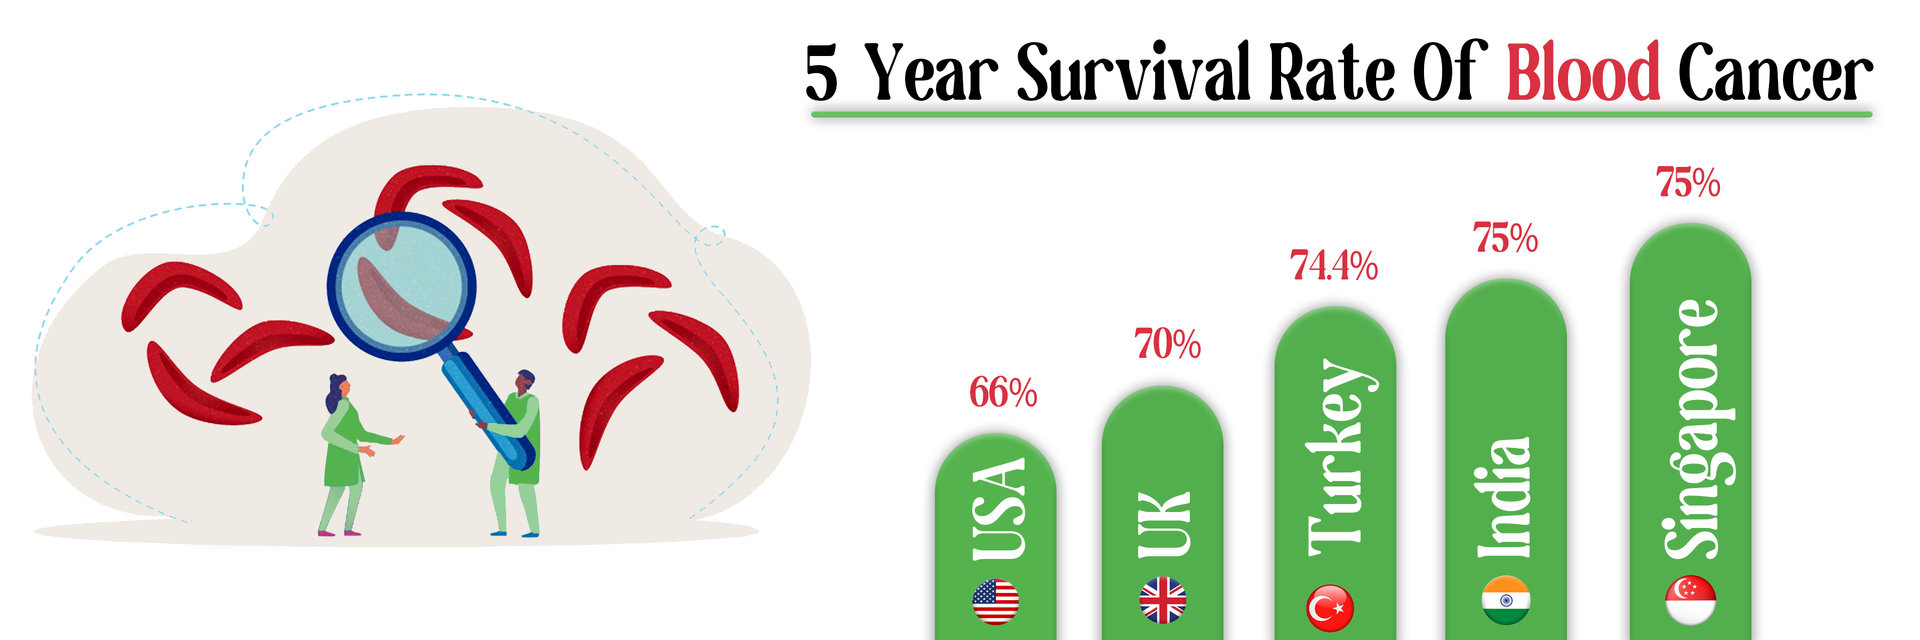 Survival rate of Blood Cancer with Bone marrow transplant